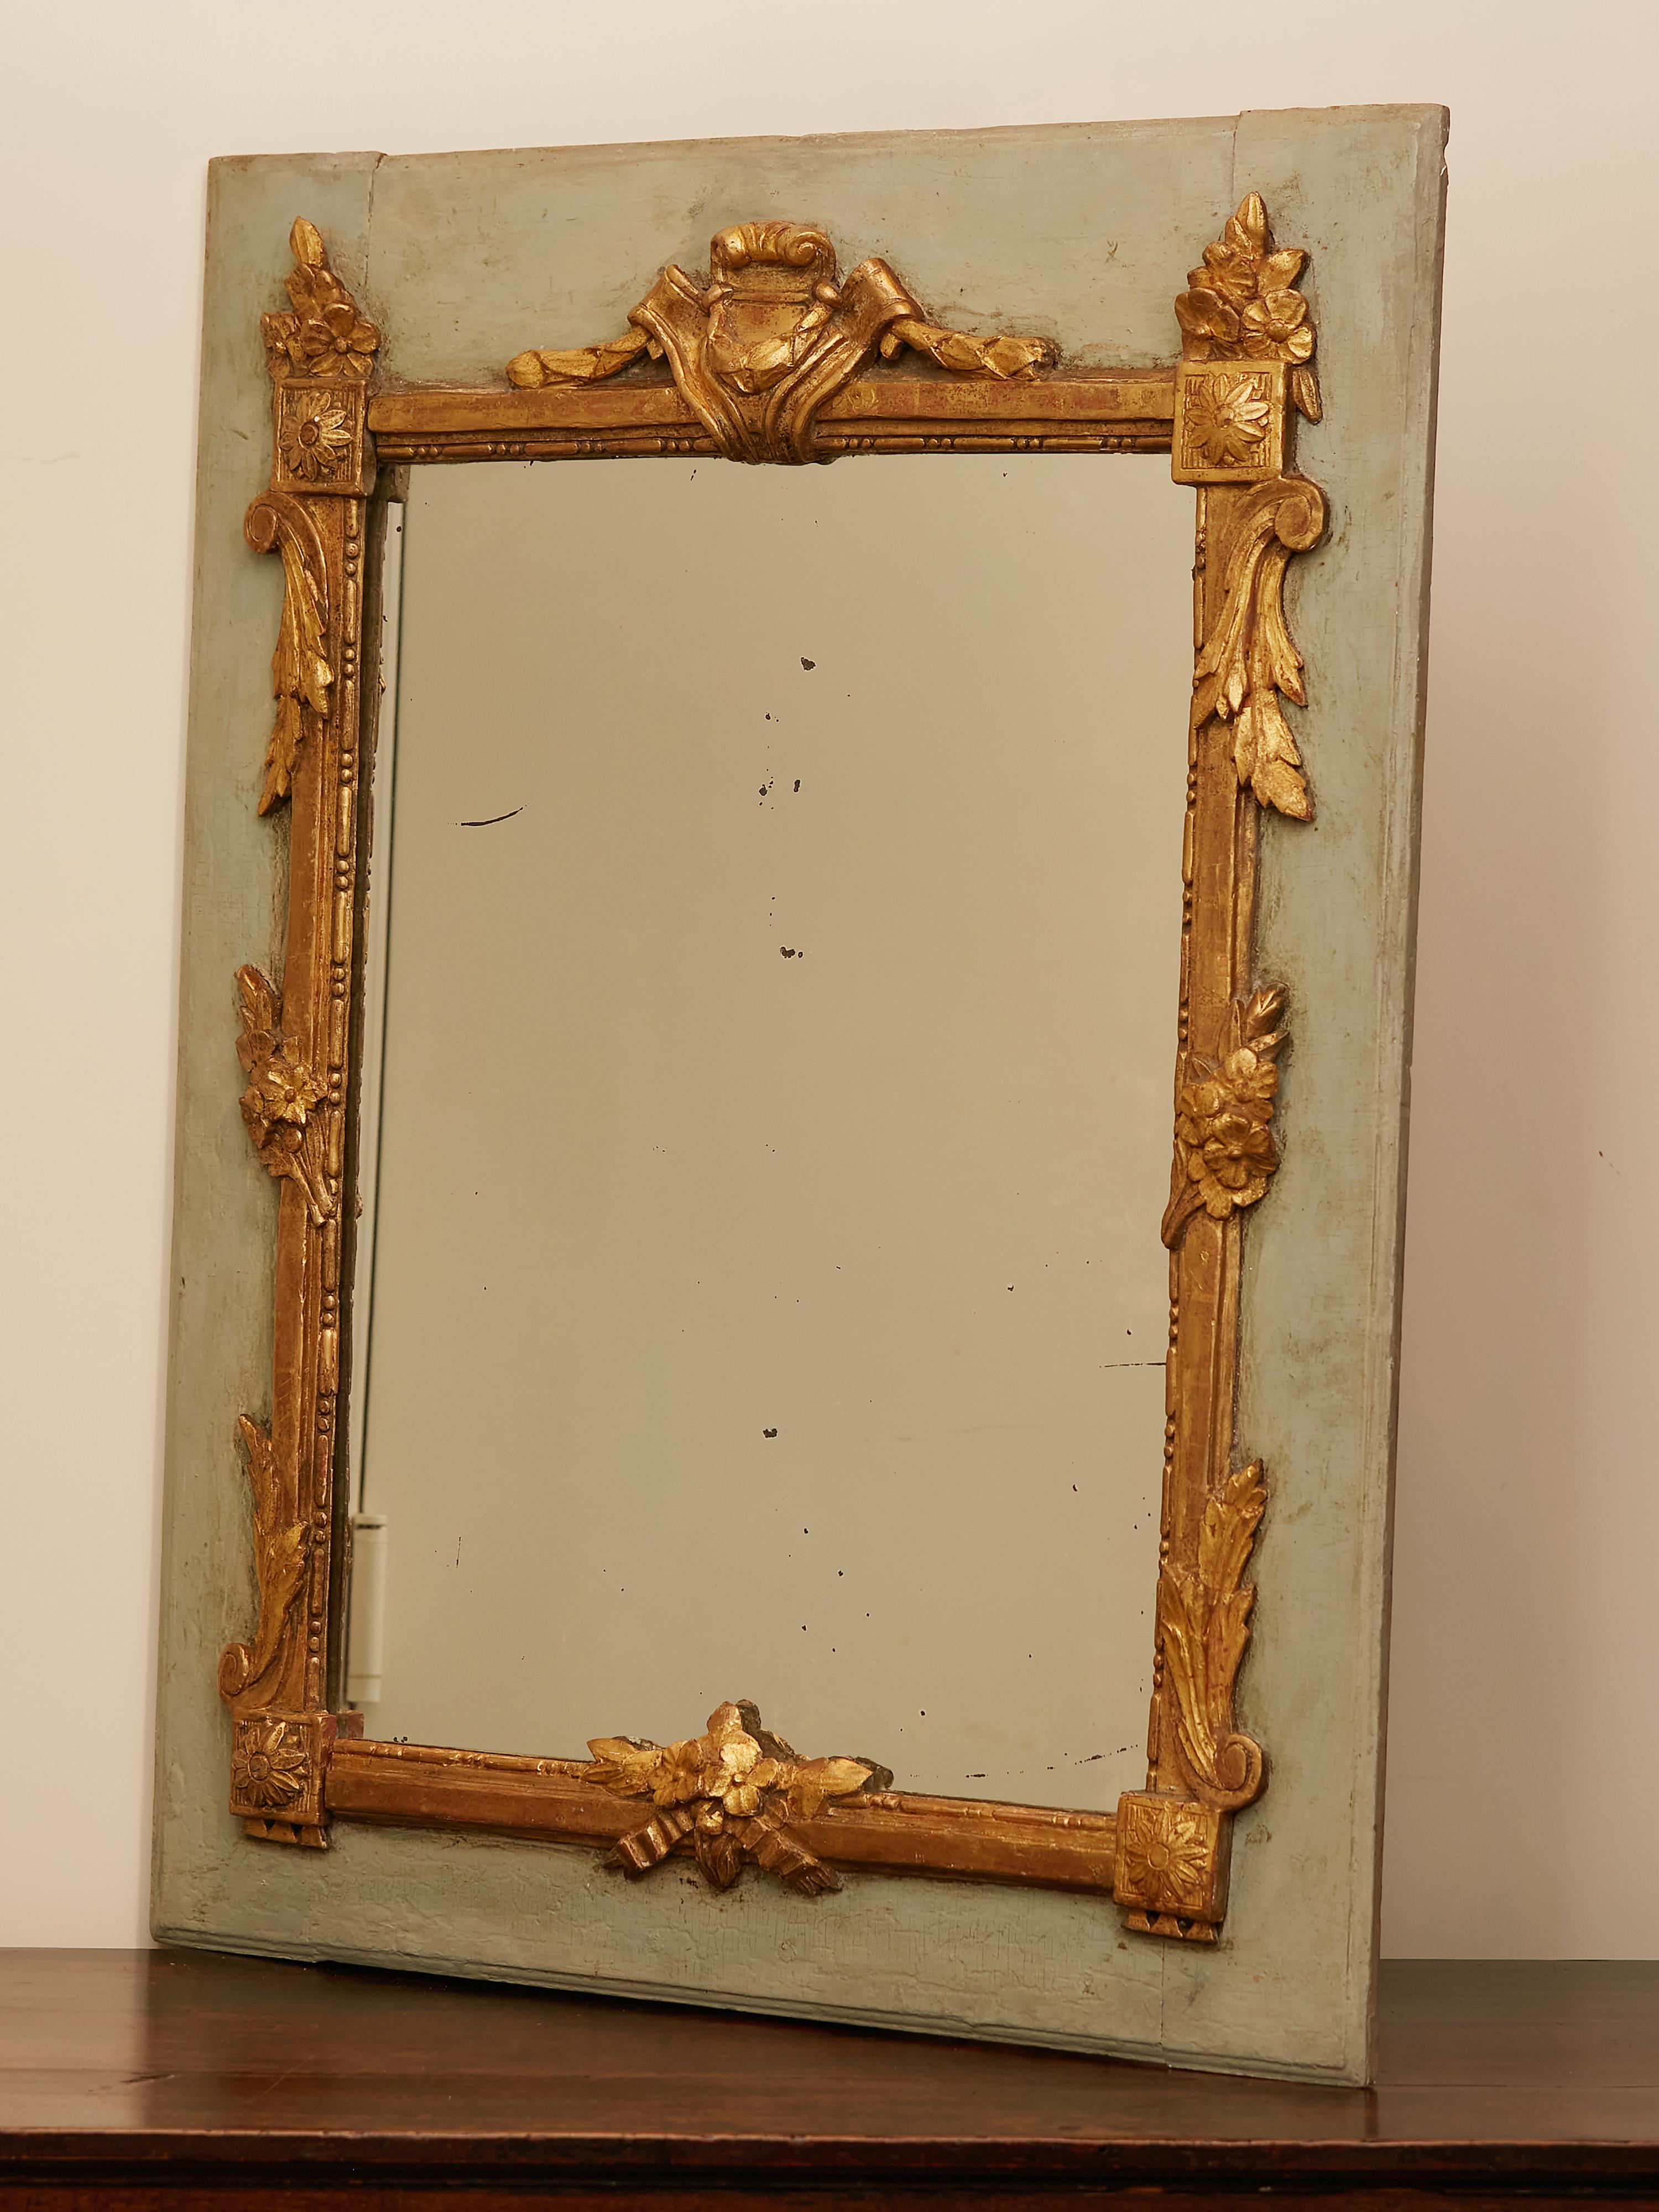 A French painted and carved giltwood mirror from the early 19th century, with cartouche, flowers and foliage motifs. Created in France during the early years of the 19th century, this rectangular mirror features a painted frame accented with